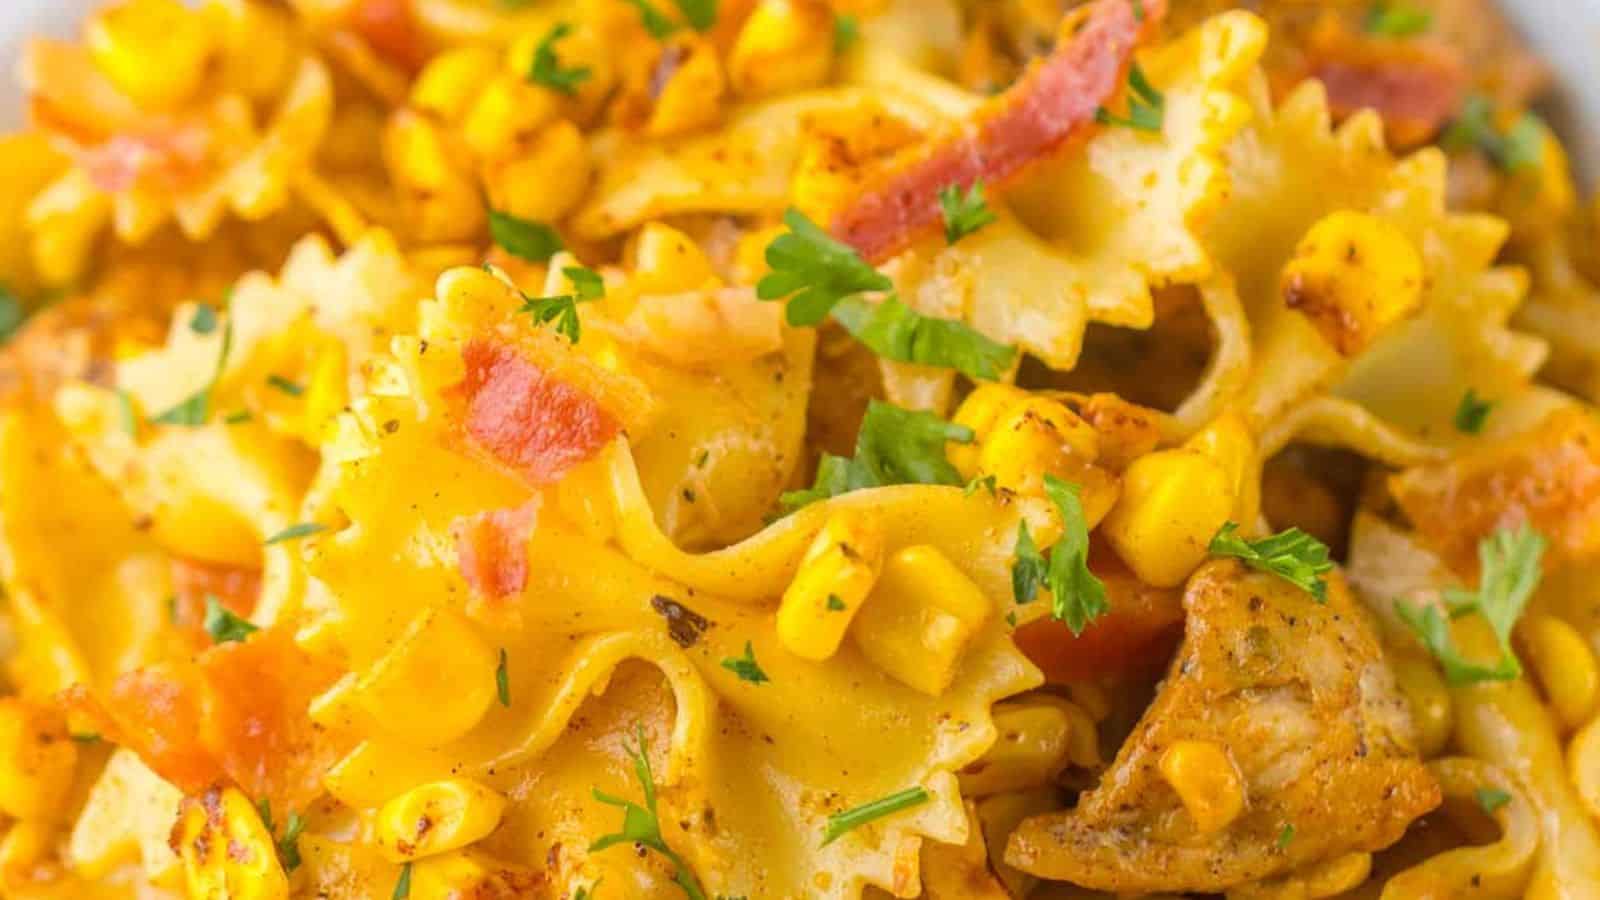 <p>Enjoy the comforting flavors of our Creamy Chicken and Corn Pasta, a dish that's perfect for family dinners. It combines the sweetness of corn with the succulence of chicken, all enveloped in a creamy sauce. It's simple, satisfying, and a great way to round off a busy day. This dish is a comforting staple for any night.<br><strong>Get the Recipe: </strong><a href="https://www.pocketfriendlyrecipes.com/chicken-and-corn-pasta/?utm_source=msn&utm_medium=page&utm_campaign=">Creamy Chicken and Corn Pasta</a></p> <p>The post <a href="https://easyindiancookbook.com/everyone-begging-for-more/">17 Italian Dishes That'll Have Everyone Begging for More!</a> appeared first on <a href="https://easyindiancookbook.com">Easy Indian Cookbook</a>.</p>